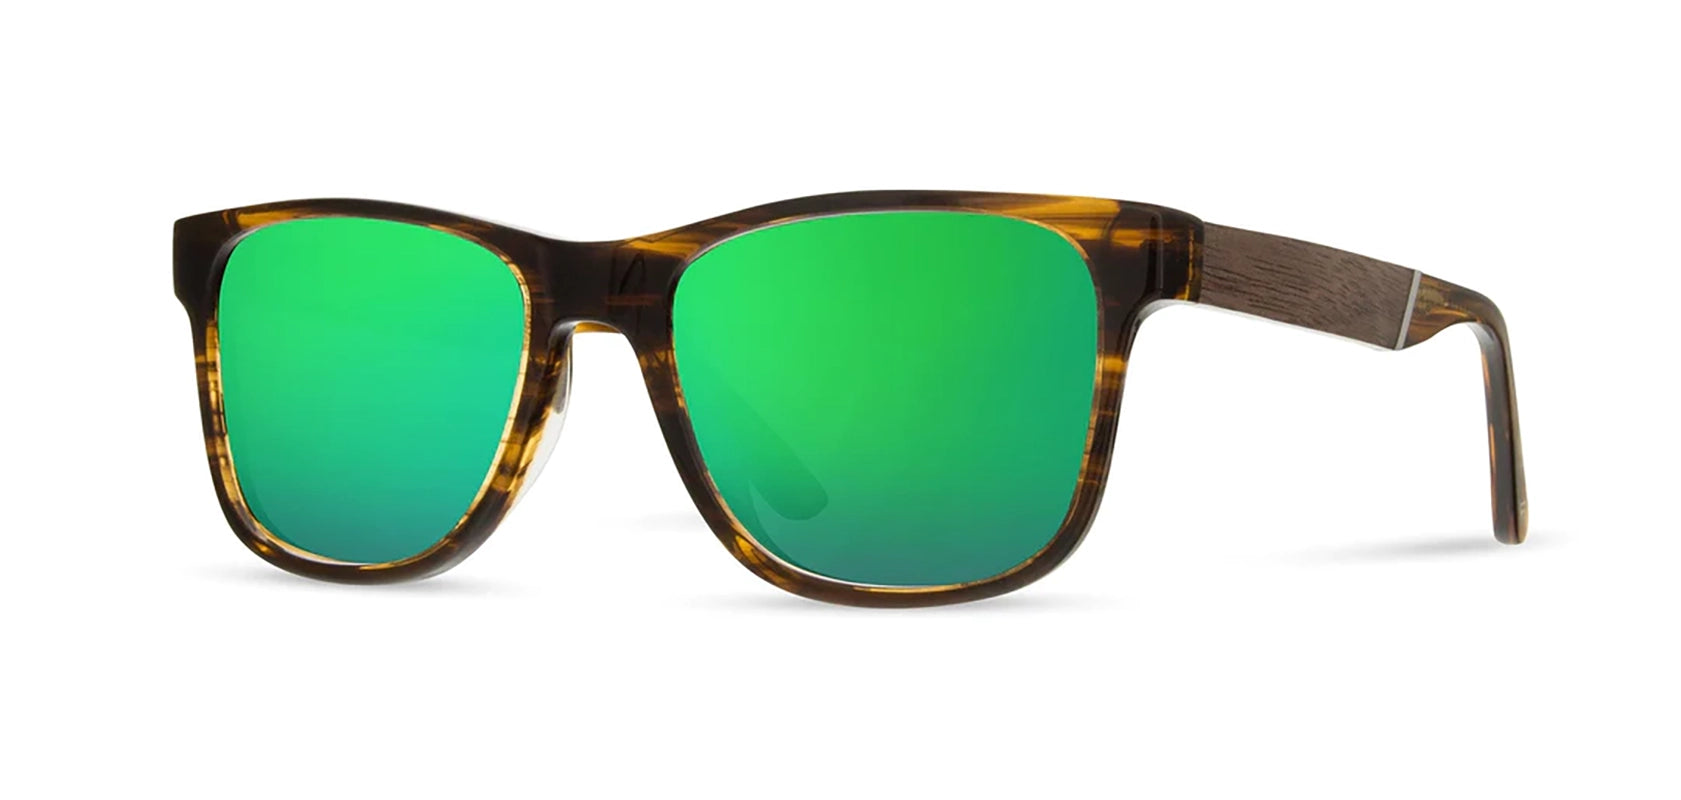 Camp trail Sunglasses with Tortoise/Walnut Frames and HD+ Green Flash Polarized lenses, front angled view